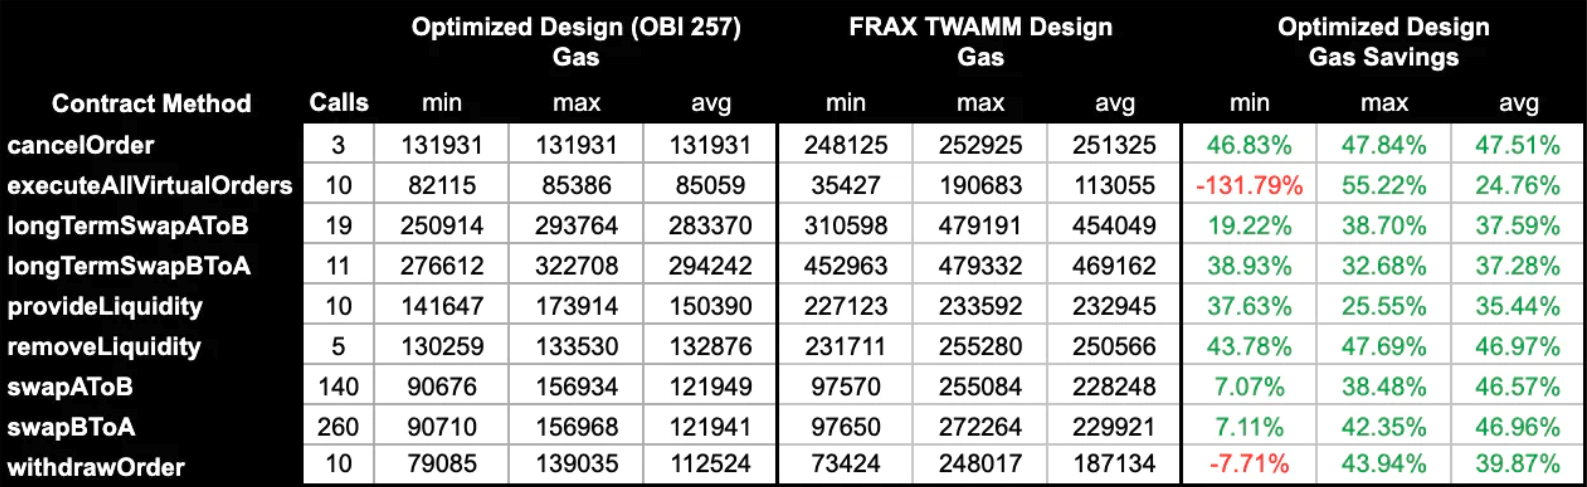 Gas comparison for contract functions of optimized design and FRAX TWAMM contract driven by benchmark design